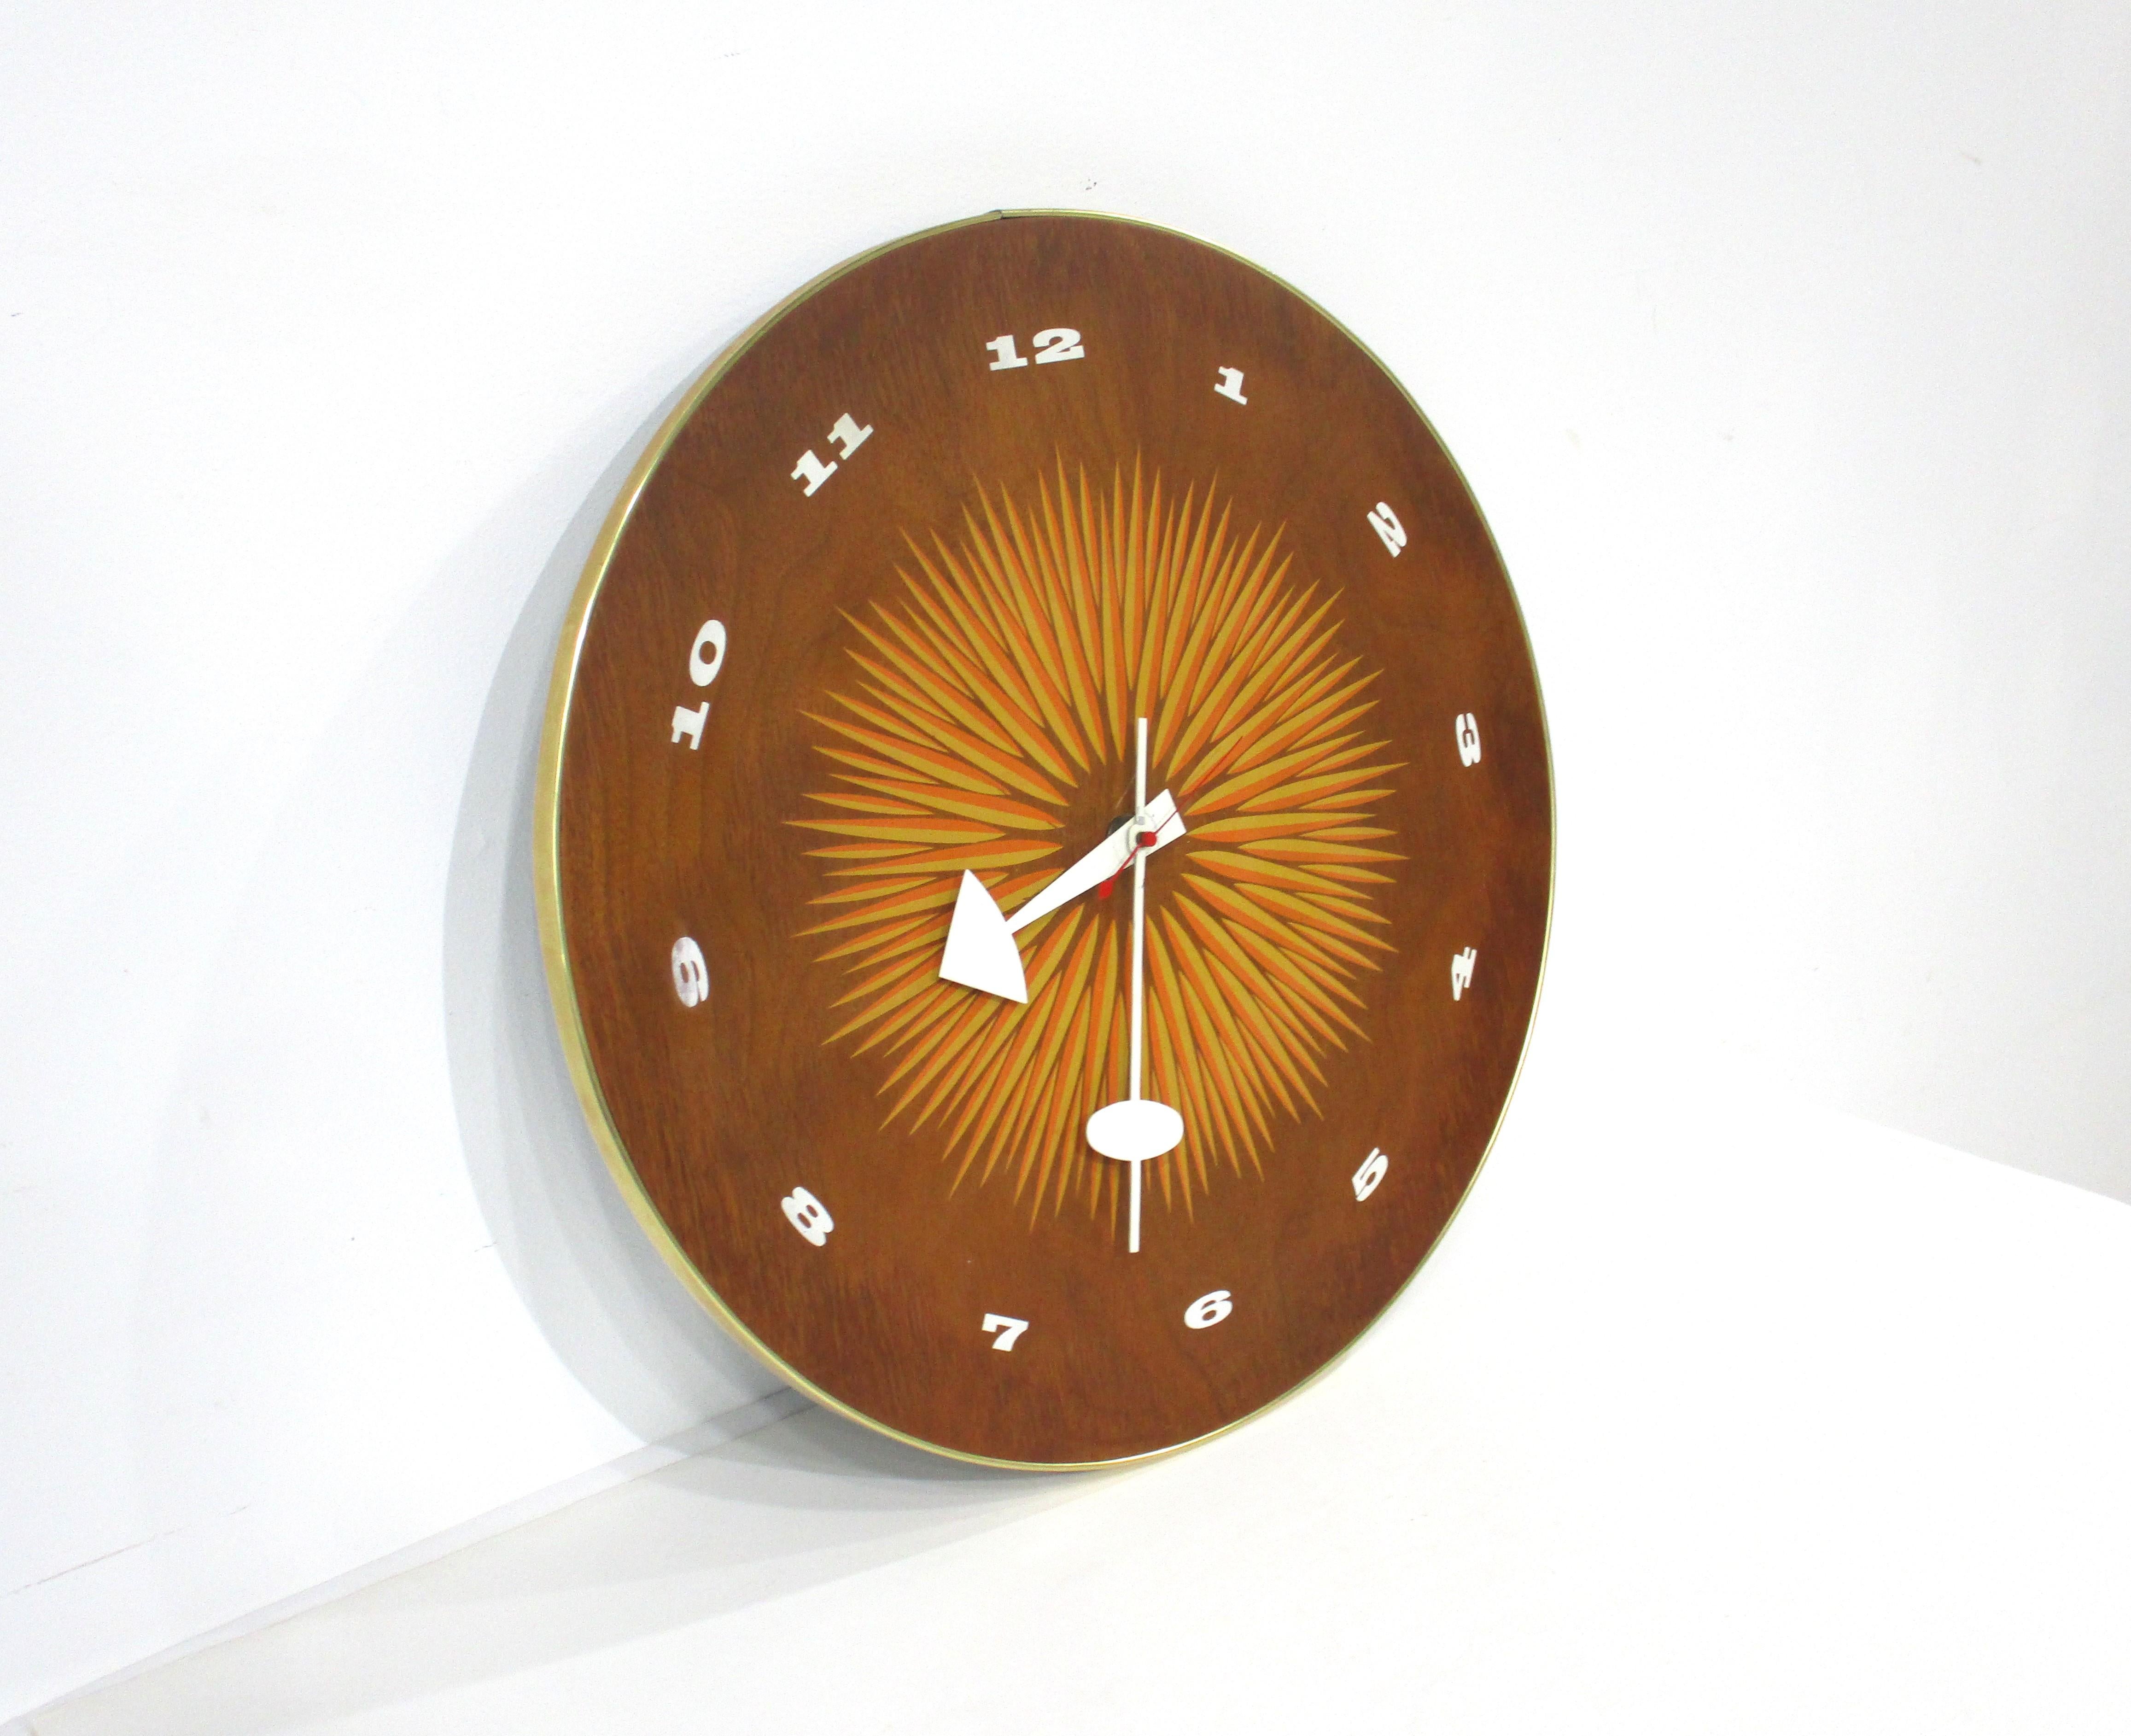 A round walnut electric wall clock with printed face having white numbers and a bold sun or flower styled orange and yellow design back round . White metal sculptural hands and red second hand with banded outside edge in a brass toned material .